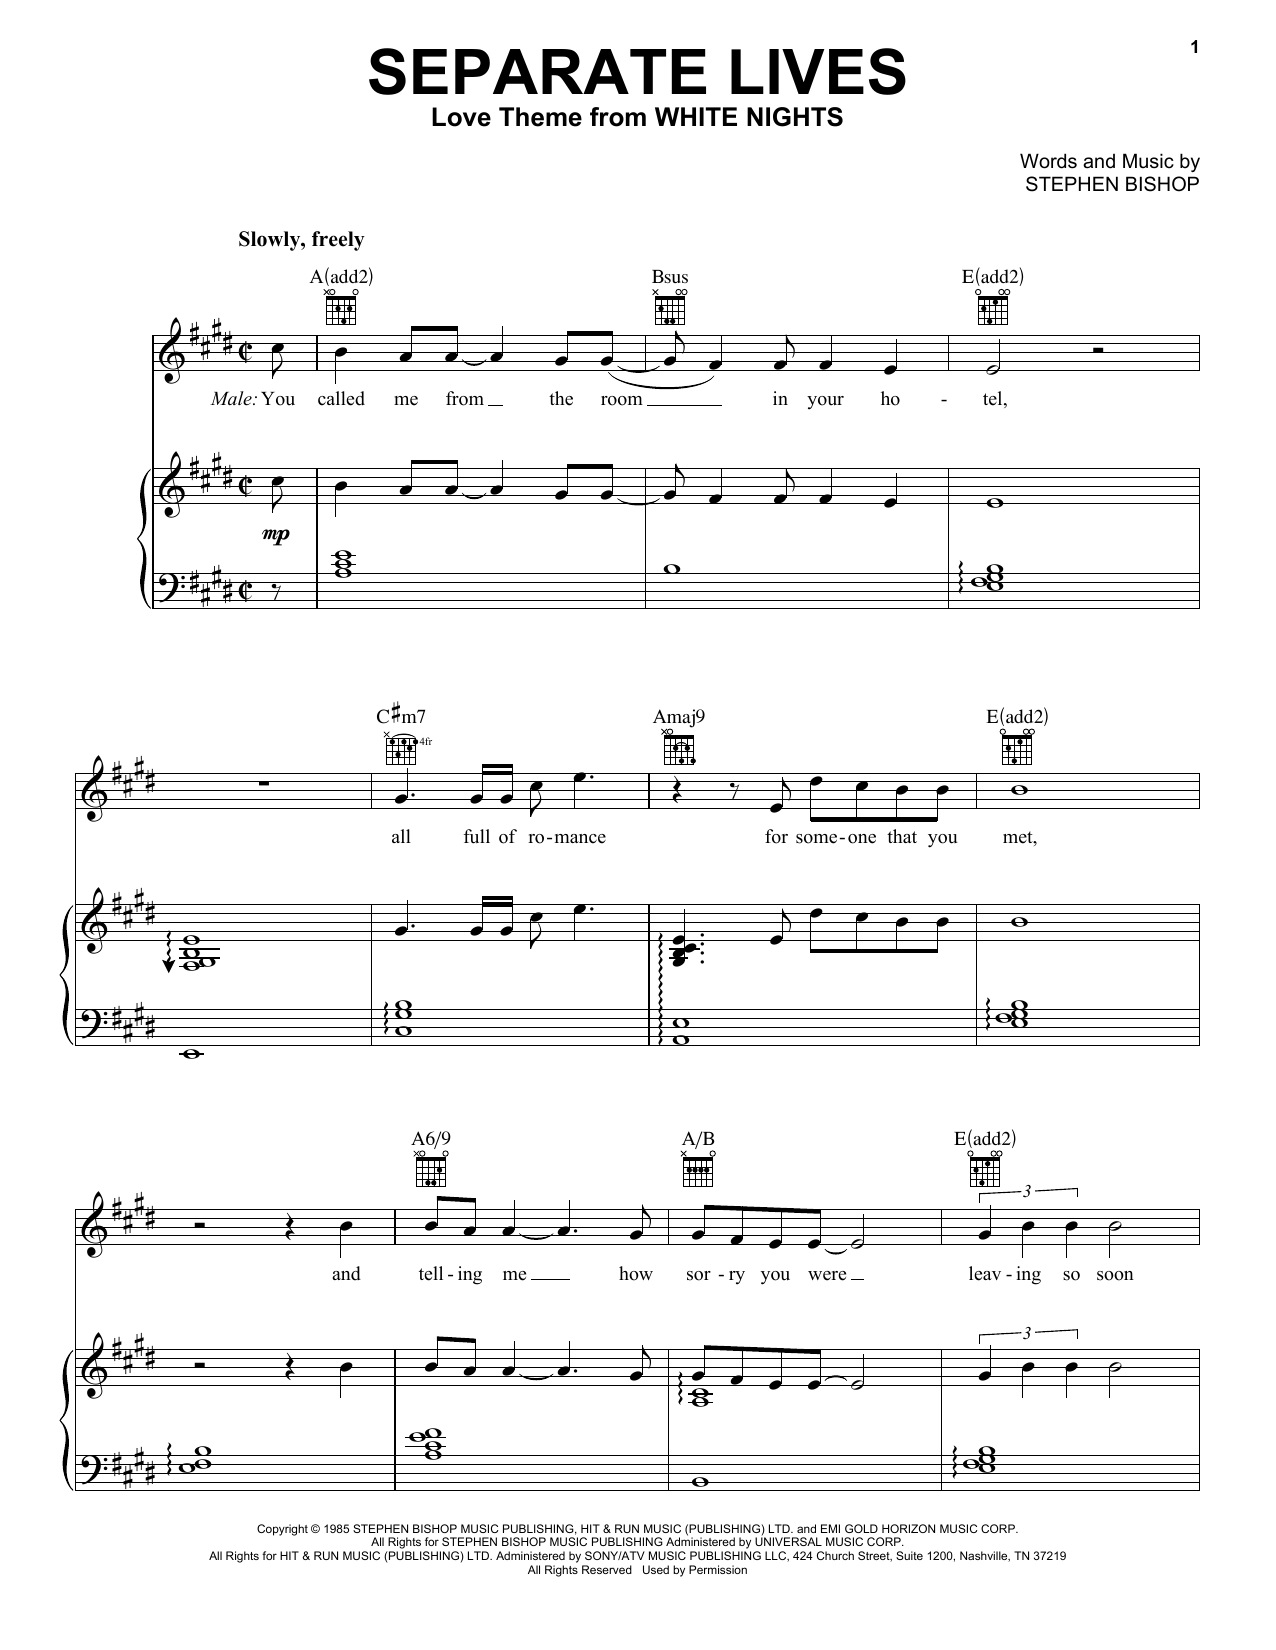 Phil Collins Separate Lives sheet music notes and chords. Download Printable PDF.